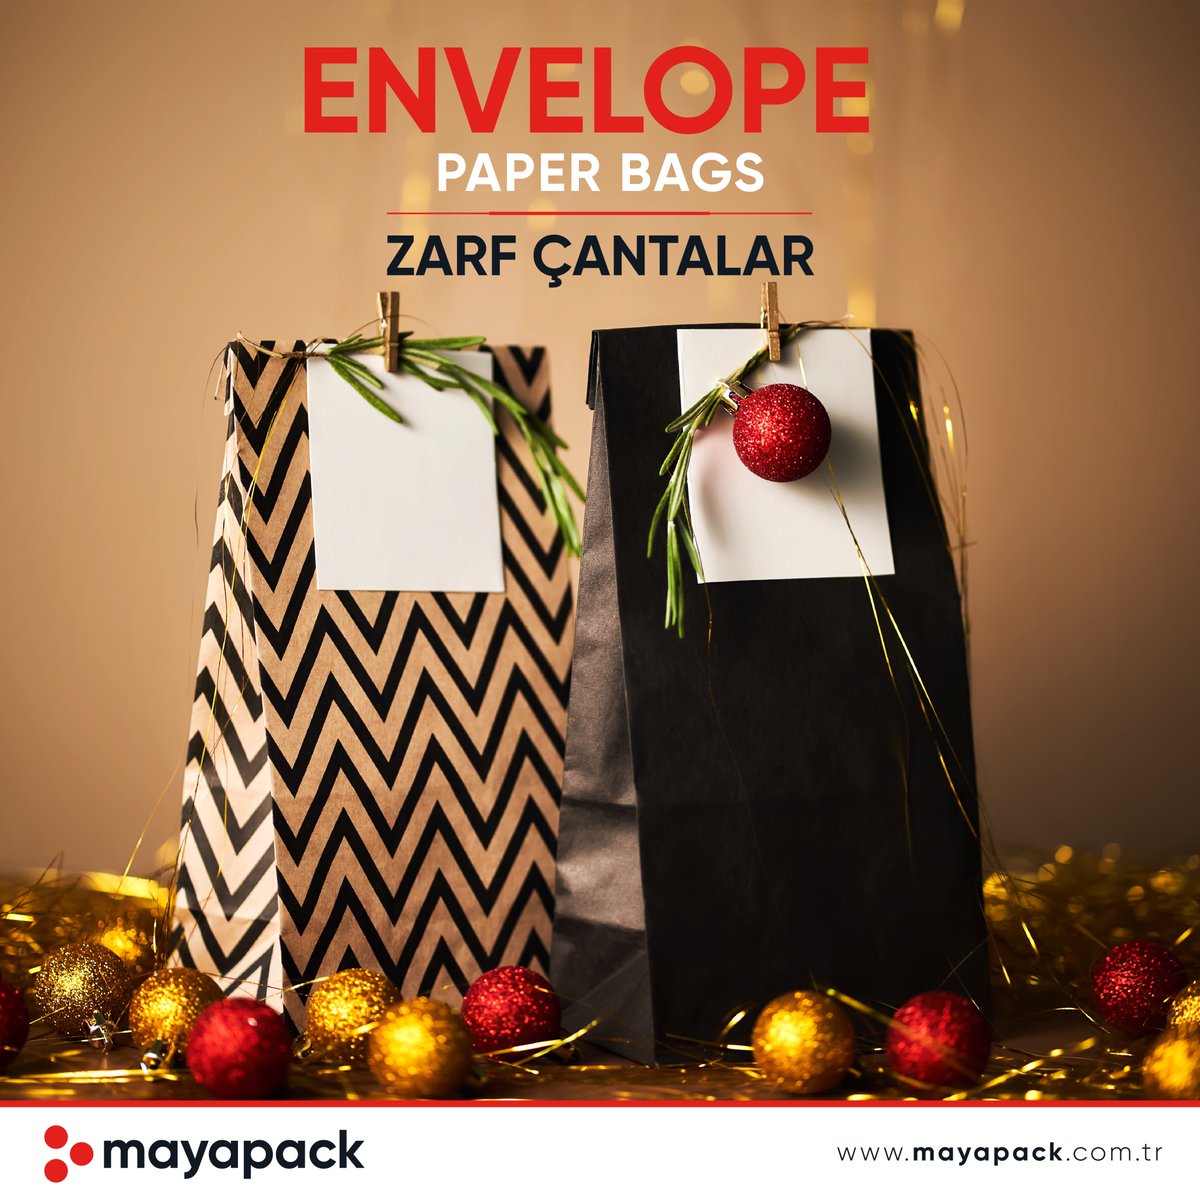 Practical Solutions in Modern and Elegant Design.
With its simple and stylish envelope shaped design,it adapts to all kinds of usage styles and creates an eye catching accessory. It offers practical use by it’s easy to open and close structure.
#EnvelopePaperBag #ElegantDesign
++